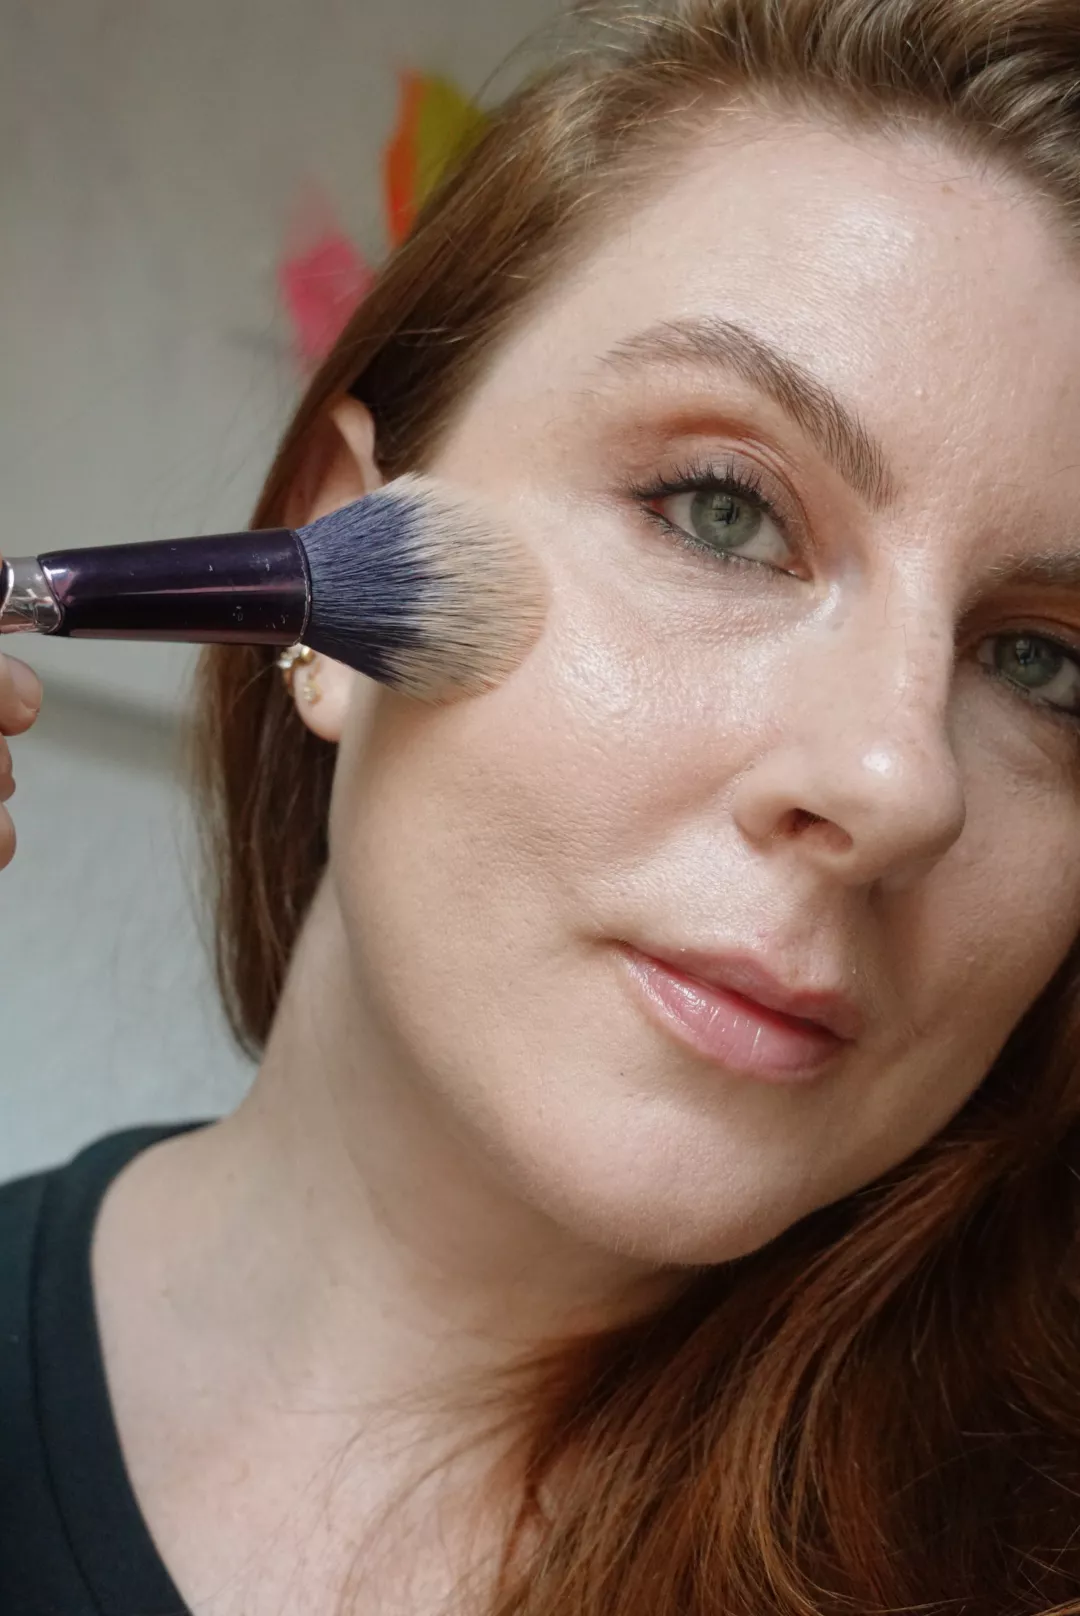 Makeup artist and Byrdie writer Ashley Rebecca applies bronzer using a fluffy brush